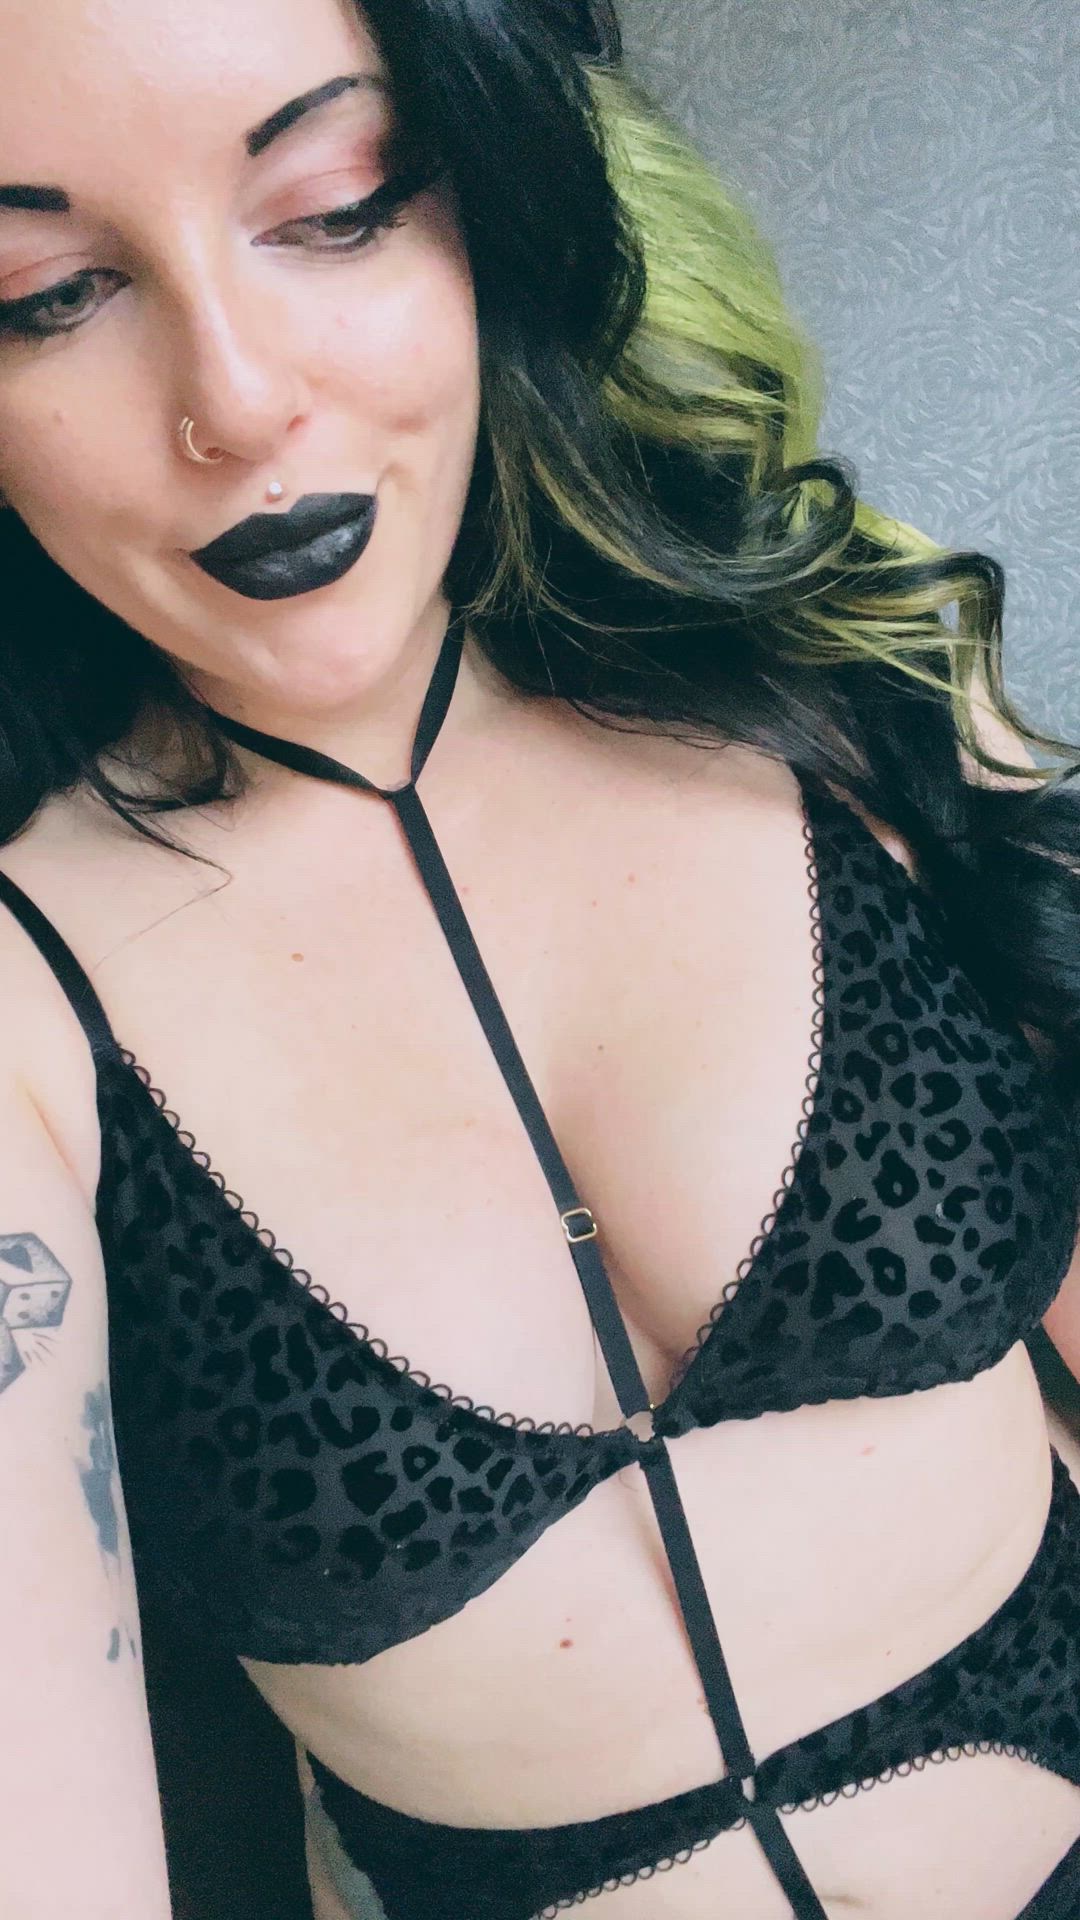 Big Tits porn video with onlyfans model rubybones <strong>@rubybones</strong>